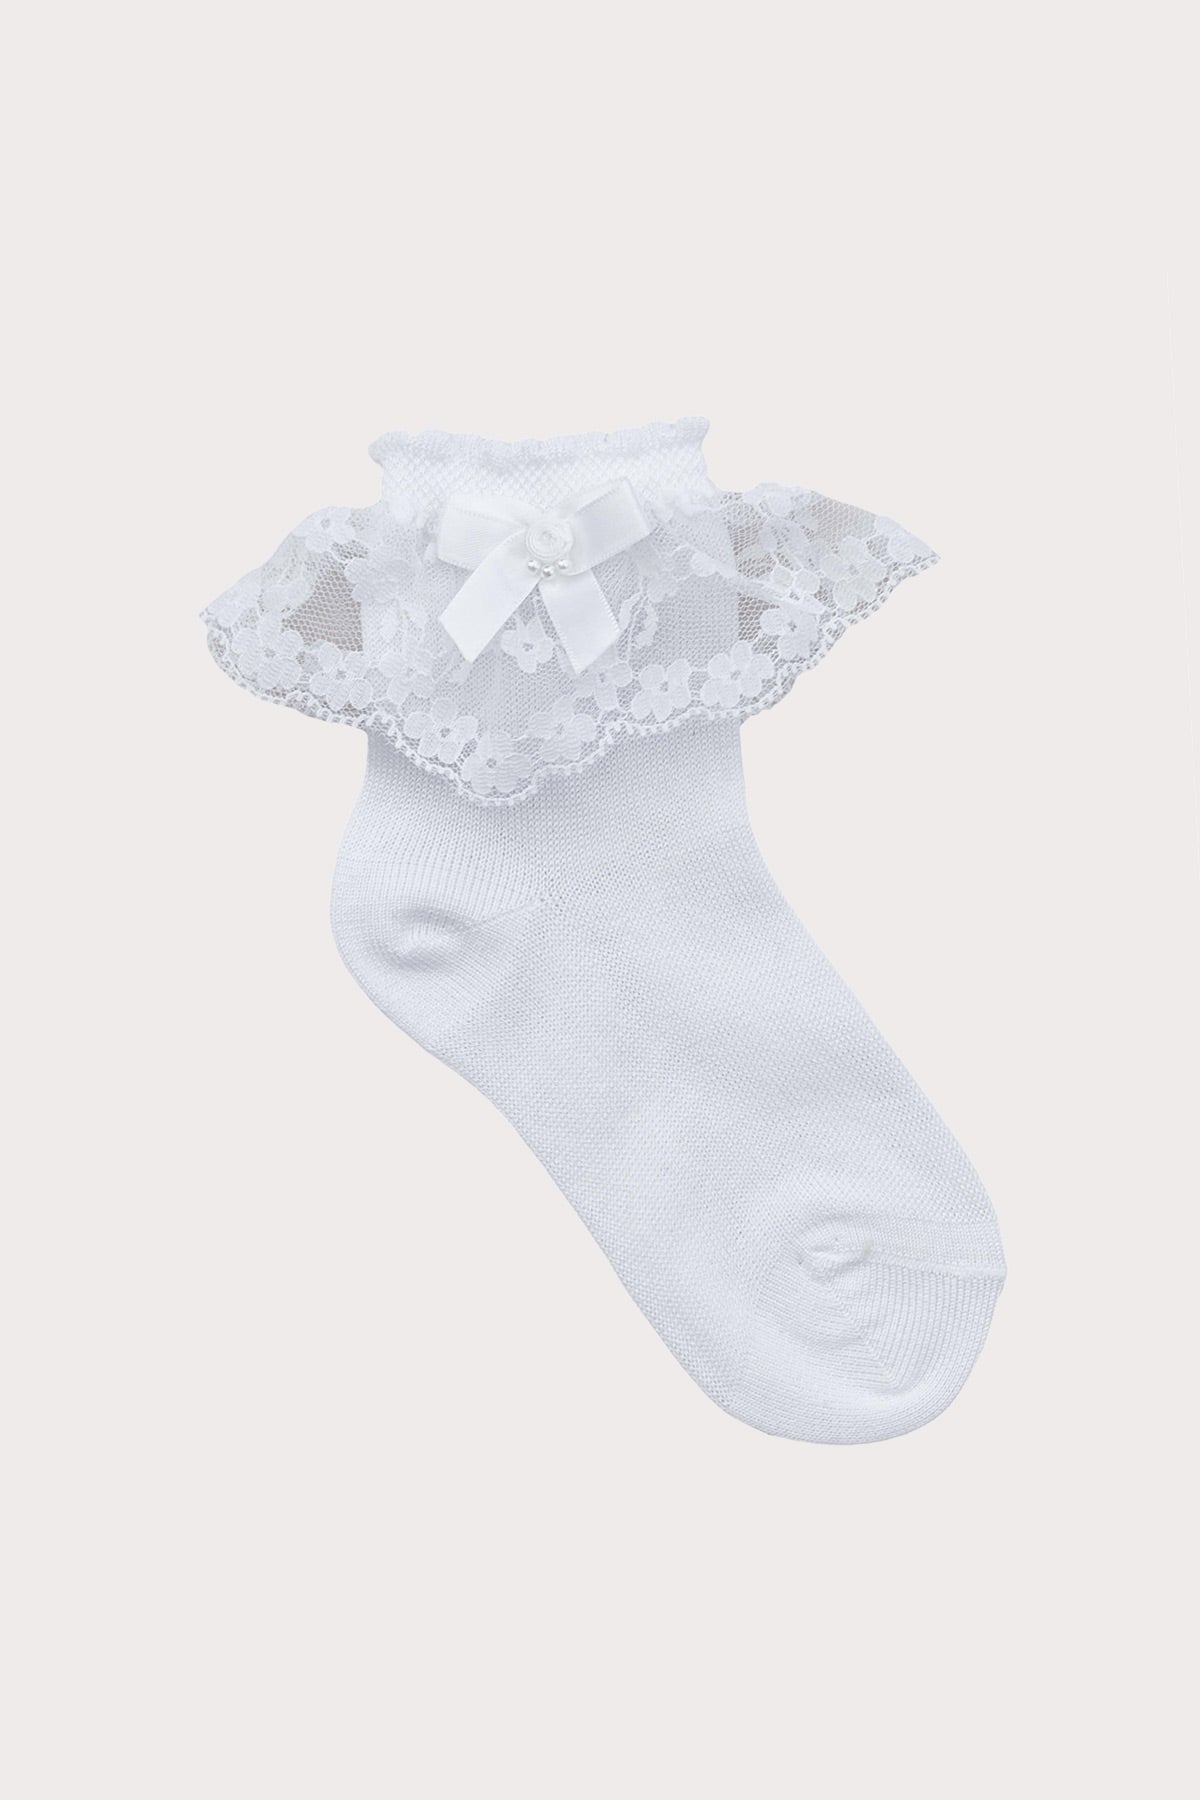 girls white lace top ankle socks